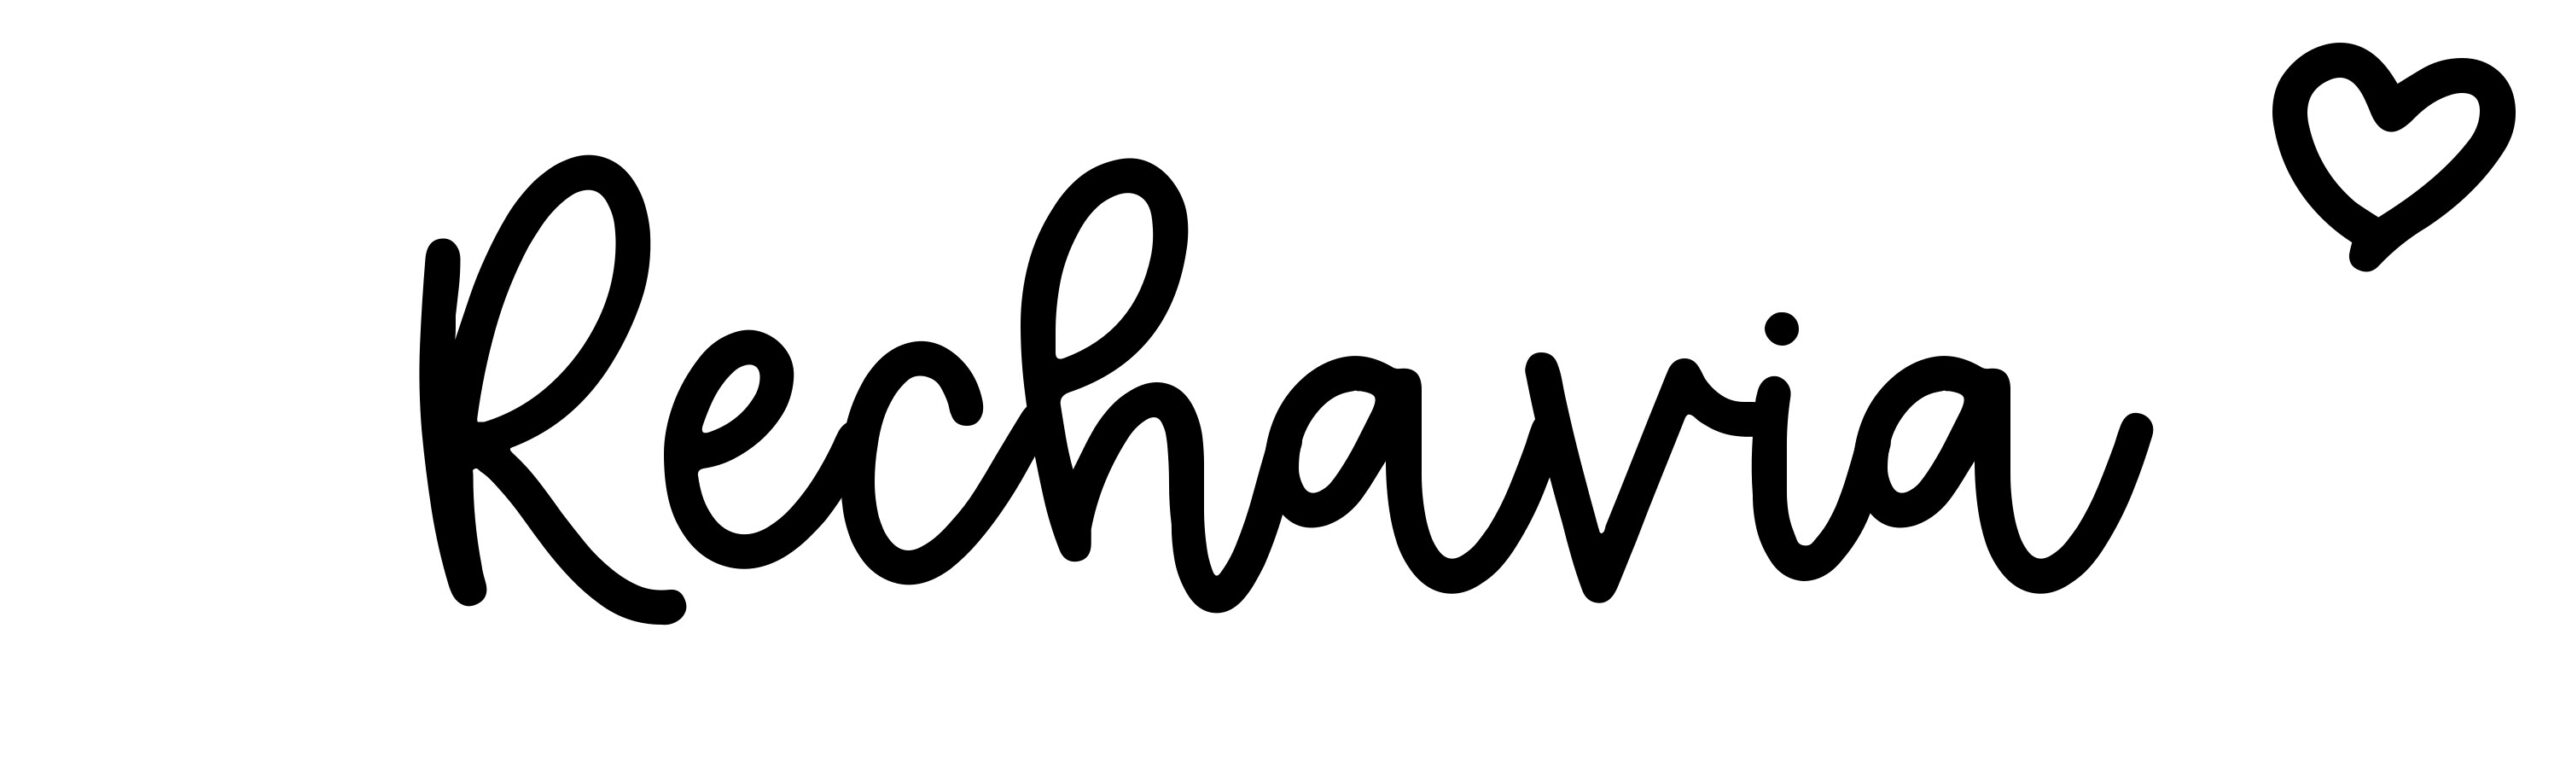 Rechavia - Name meaning, origin, variations and more